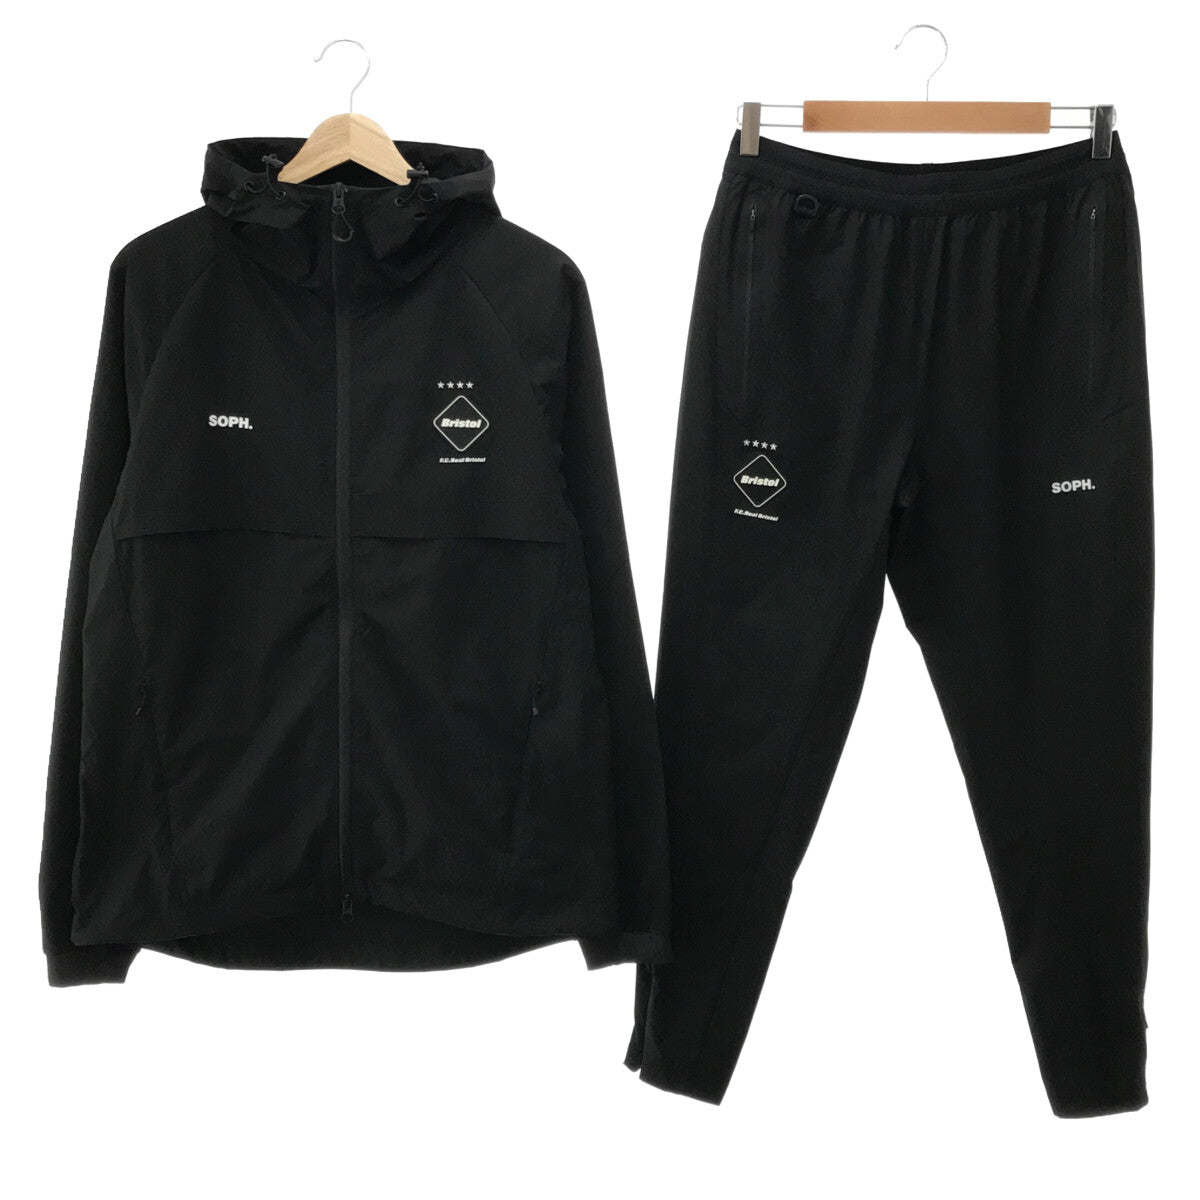 NIKEfcrb 4WAYストレッチセットアップ　M